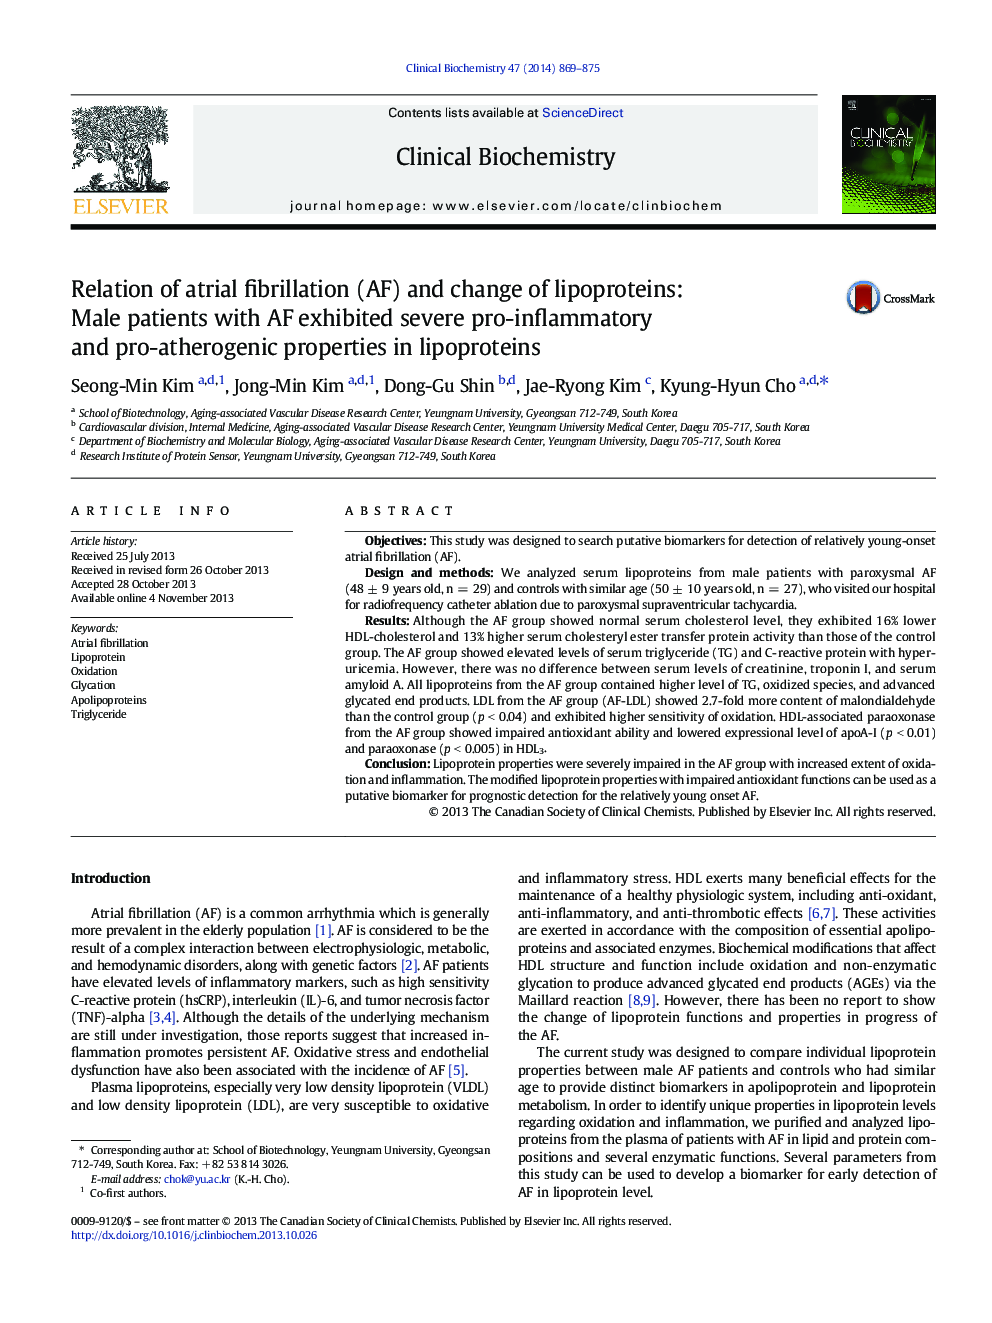 Relation of atrial fibrillation (AF) and change of lipoproteins: Male patients with AF exhibited severe pro-inflammatory and pro-atherogenic properties in lipoproteins